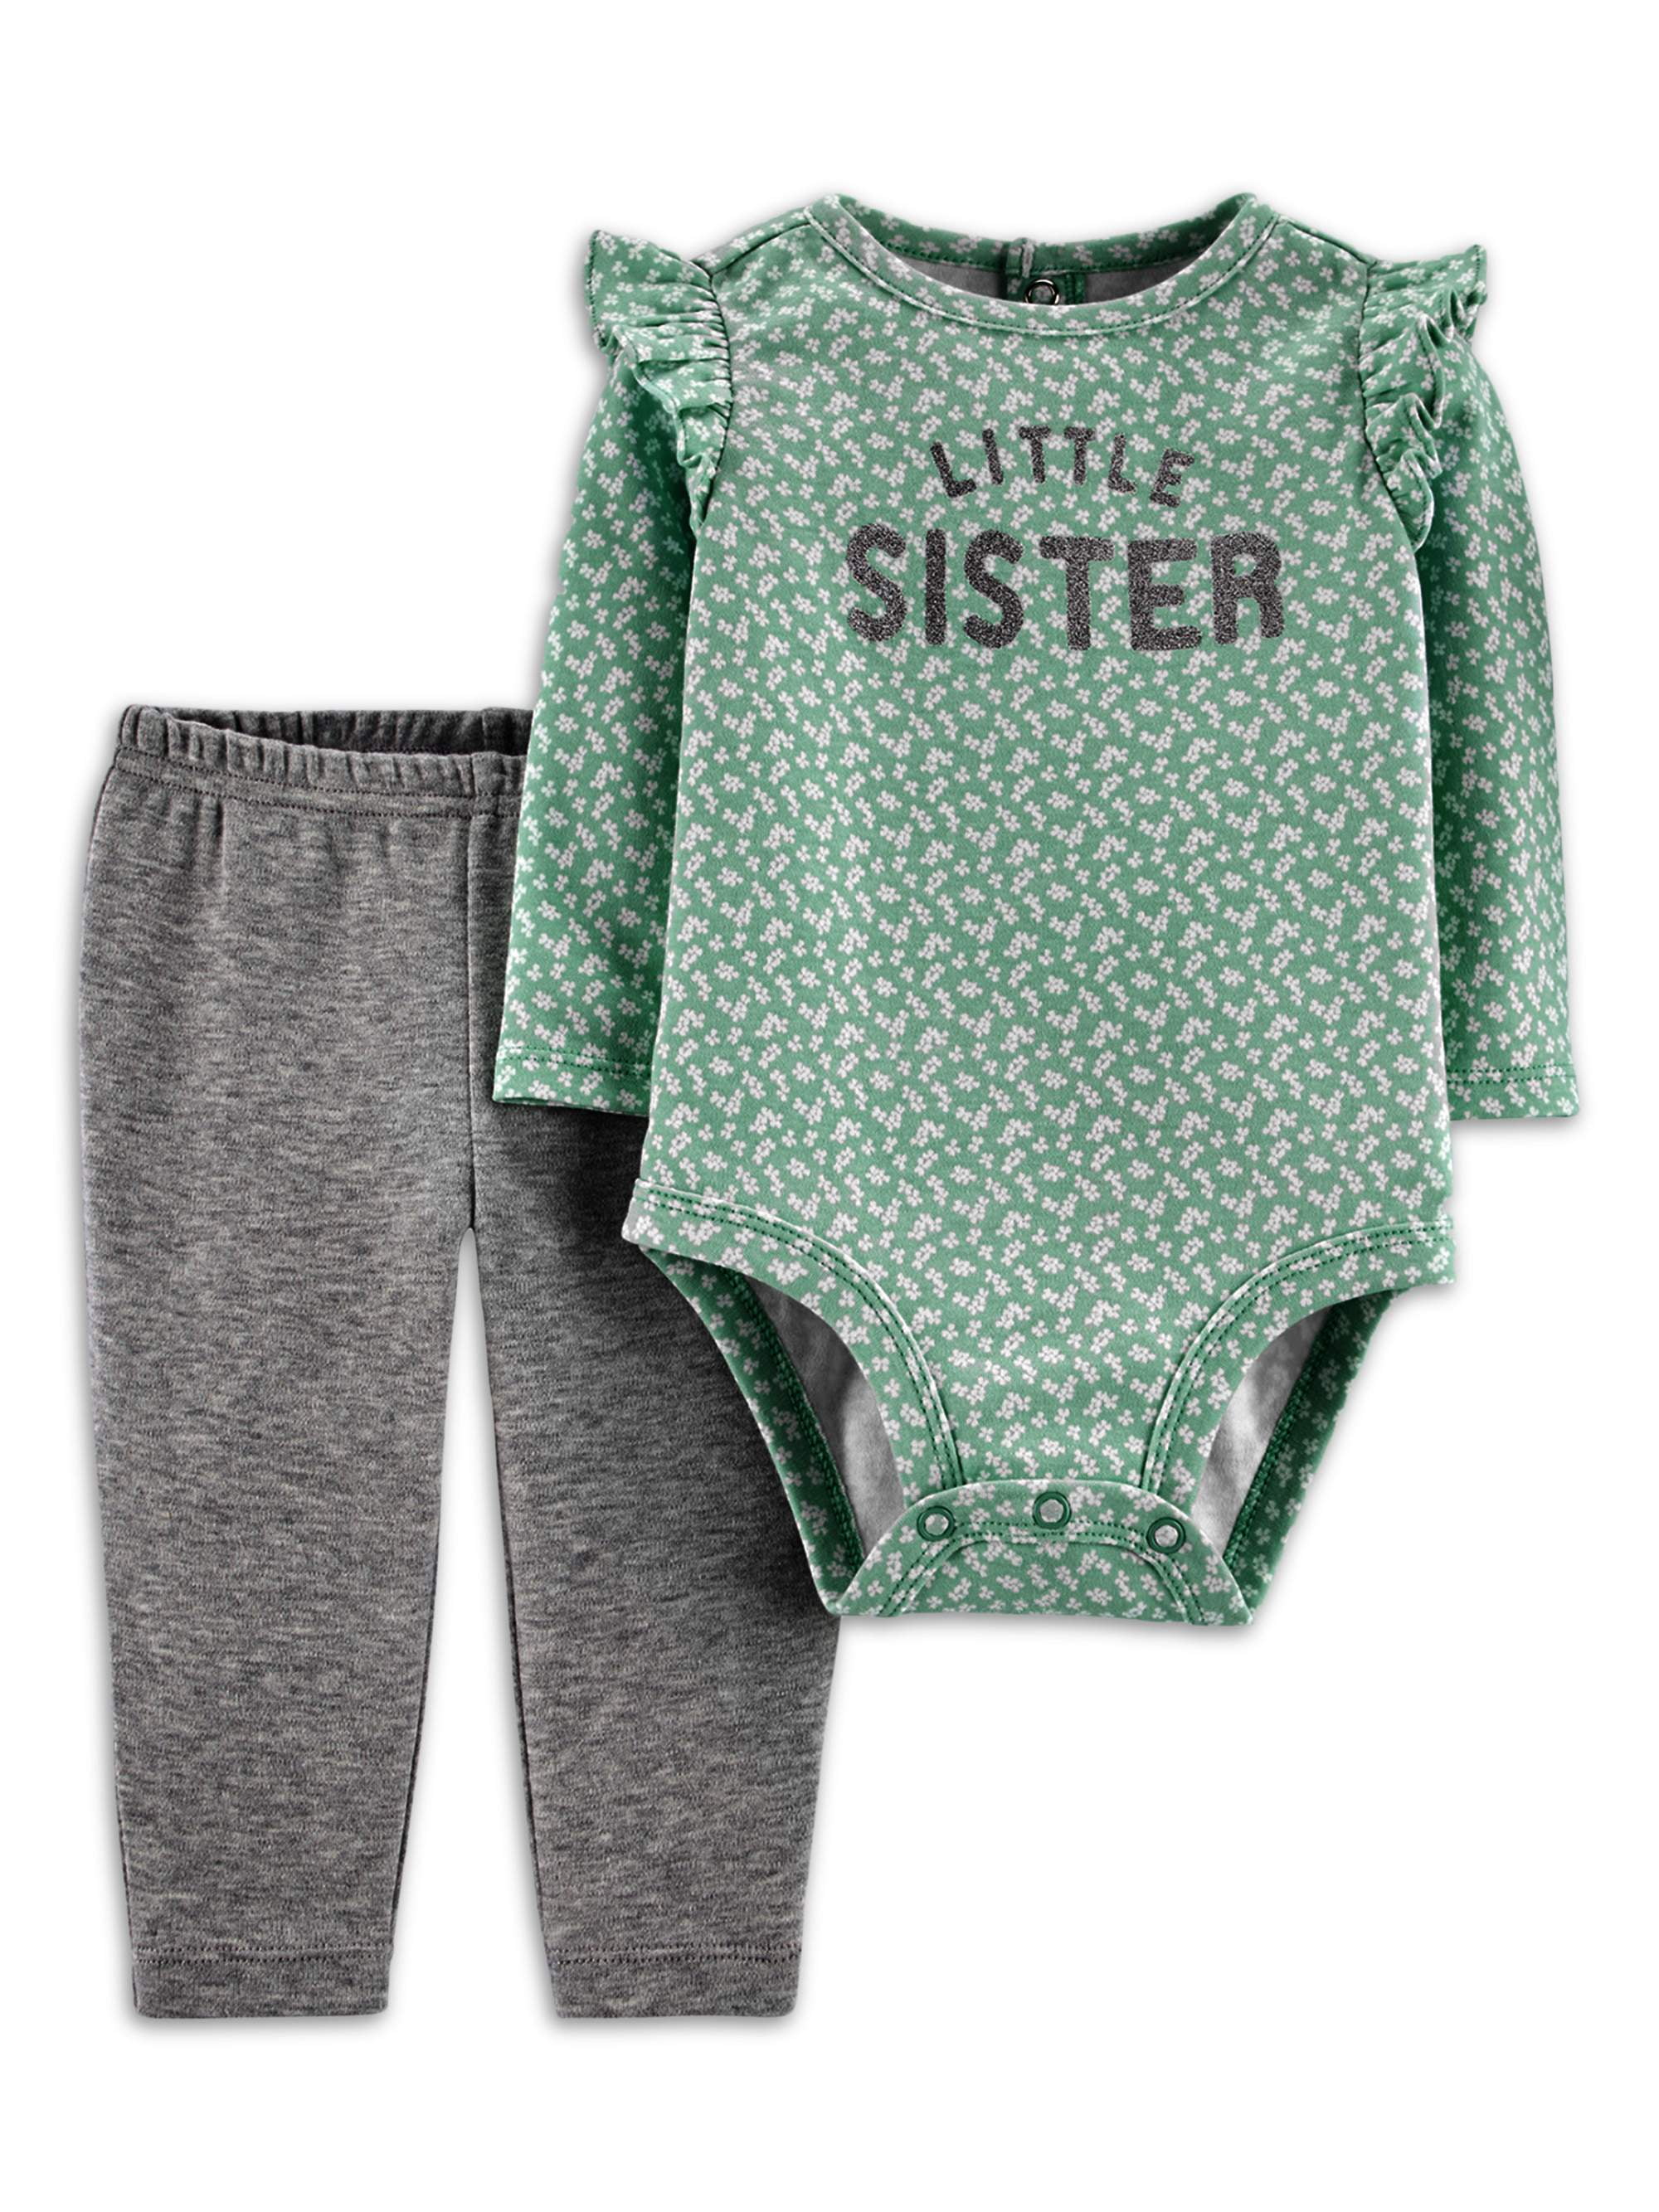 child of mine little sister outfit